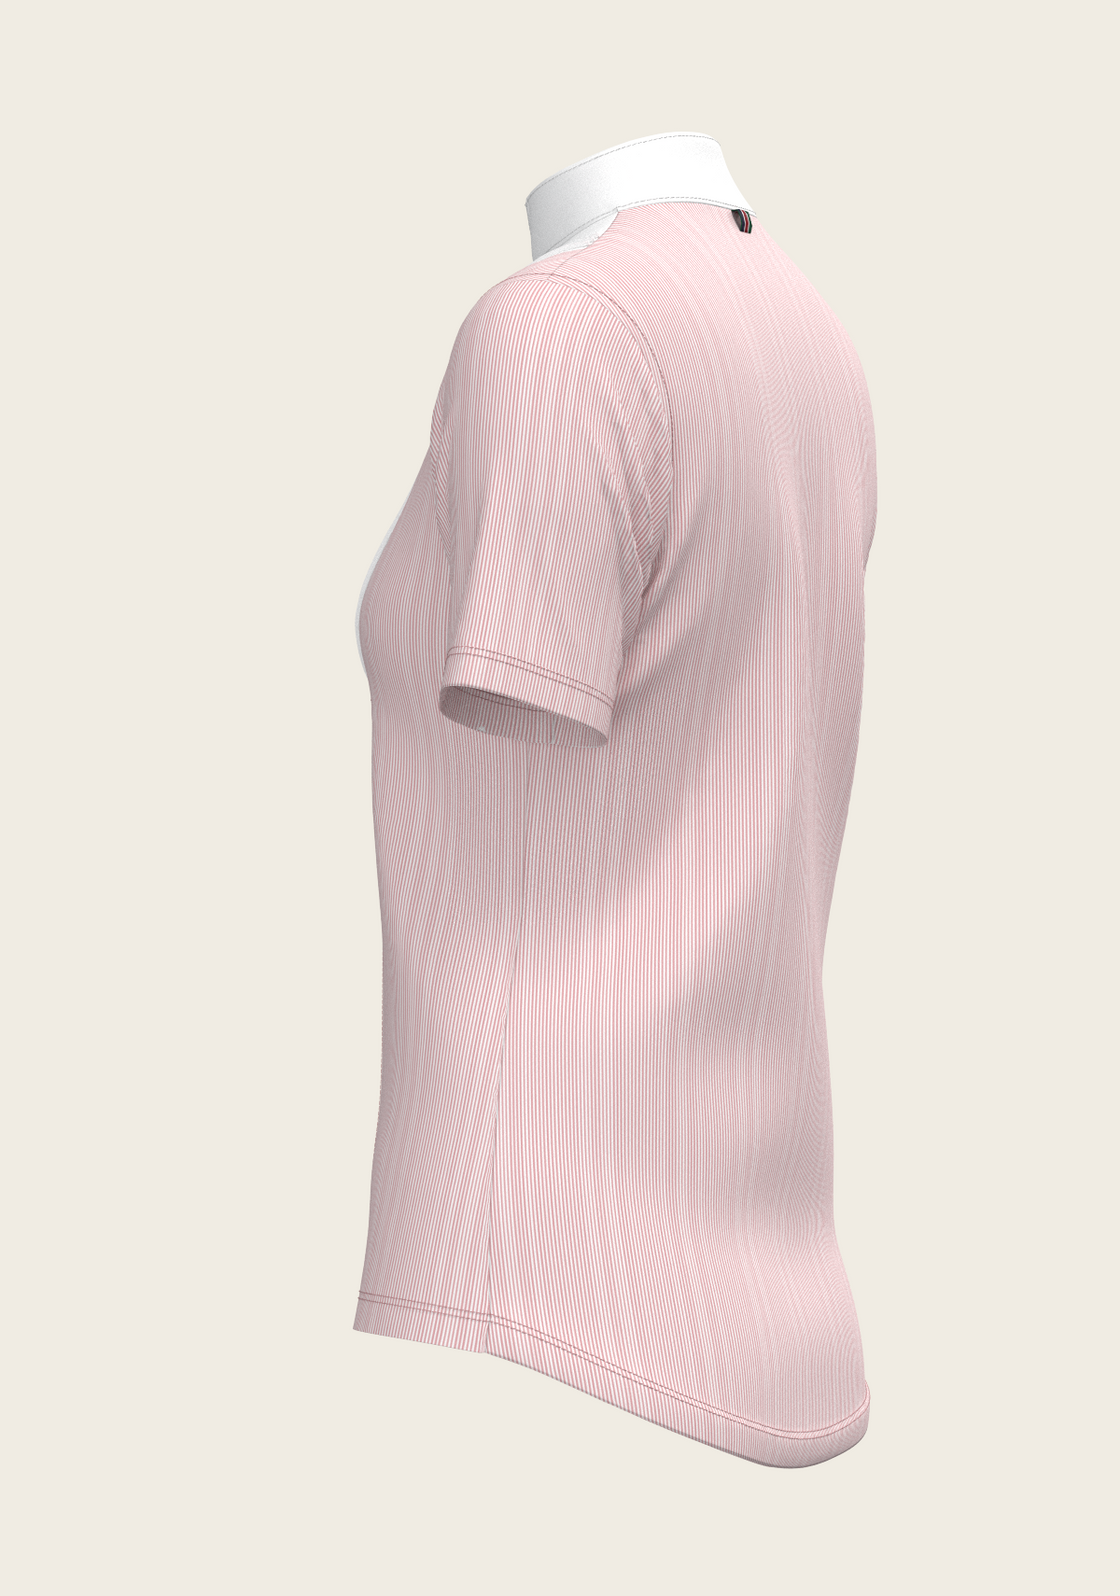 PRE ORDER • Stripes in Rose Short Pleated Short Sleeve Show Shirt